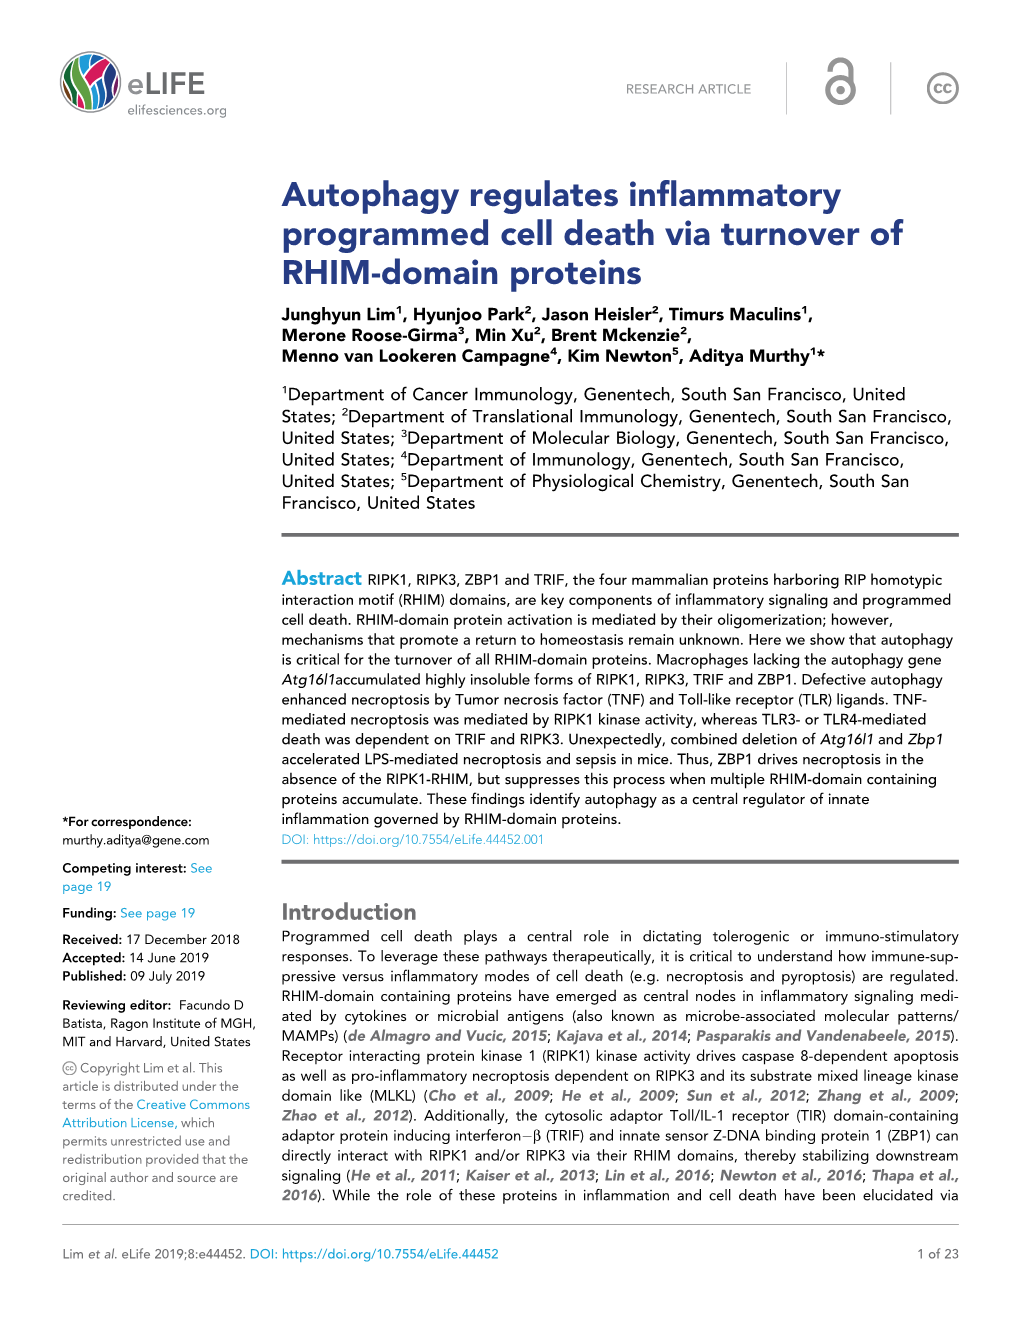 Autophagy Regulates Inflammatory Programmed Cell Death Via Turnover of RHIM-Domain Proteins